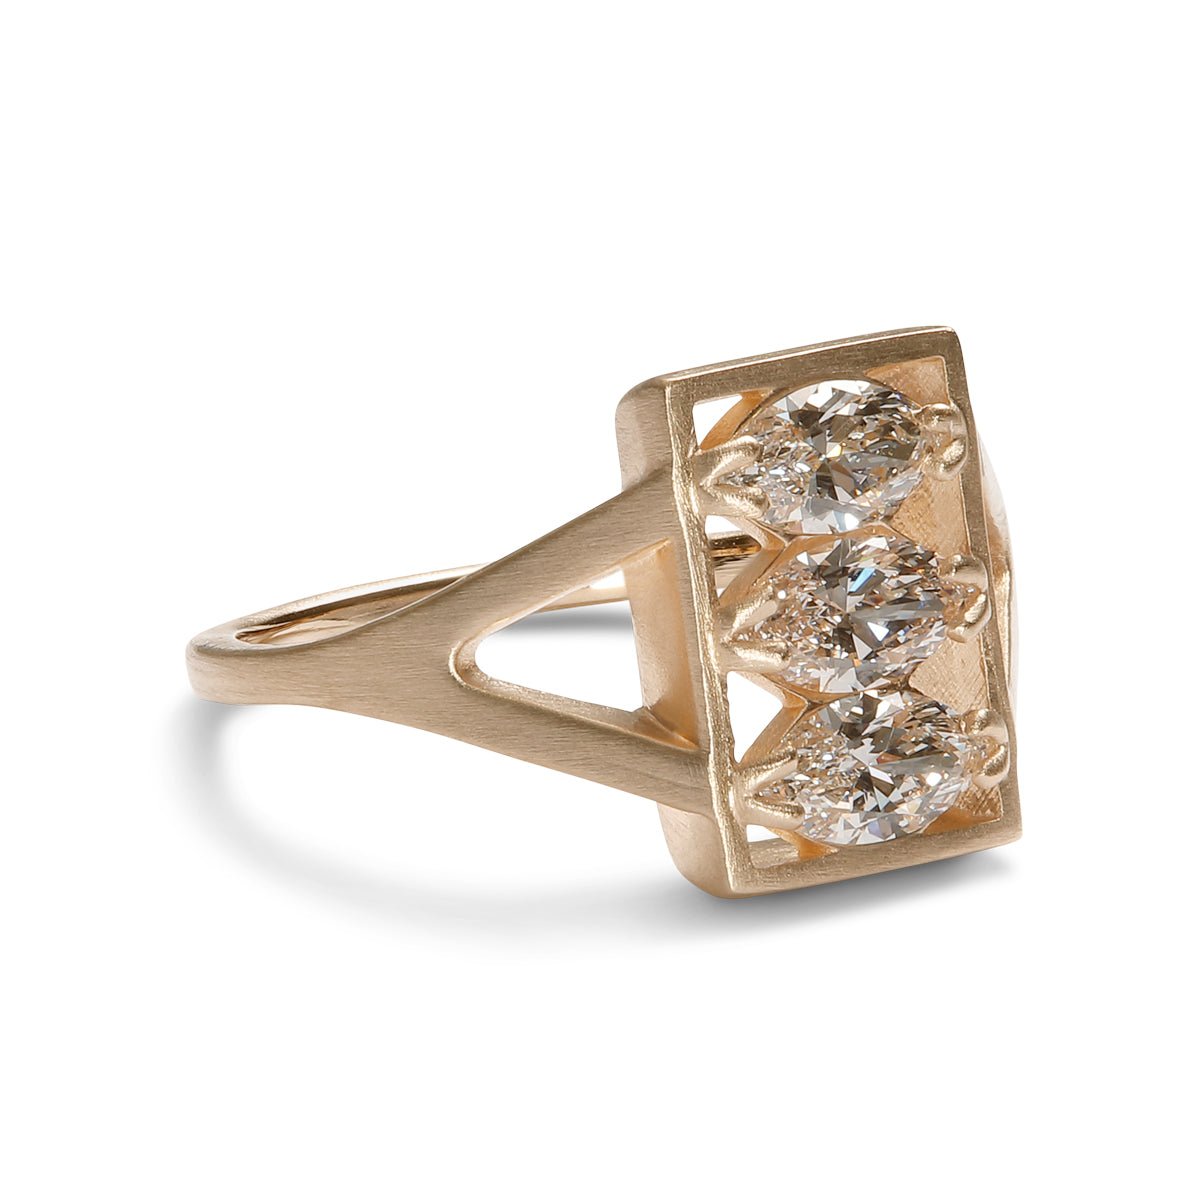 Rectangular Claro ring, featuring marquise lab-grown diamonds set in 14K gold. Designed and handcrafted in Portland, Oregon.